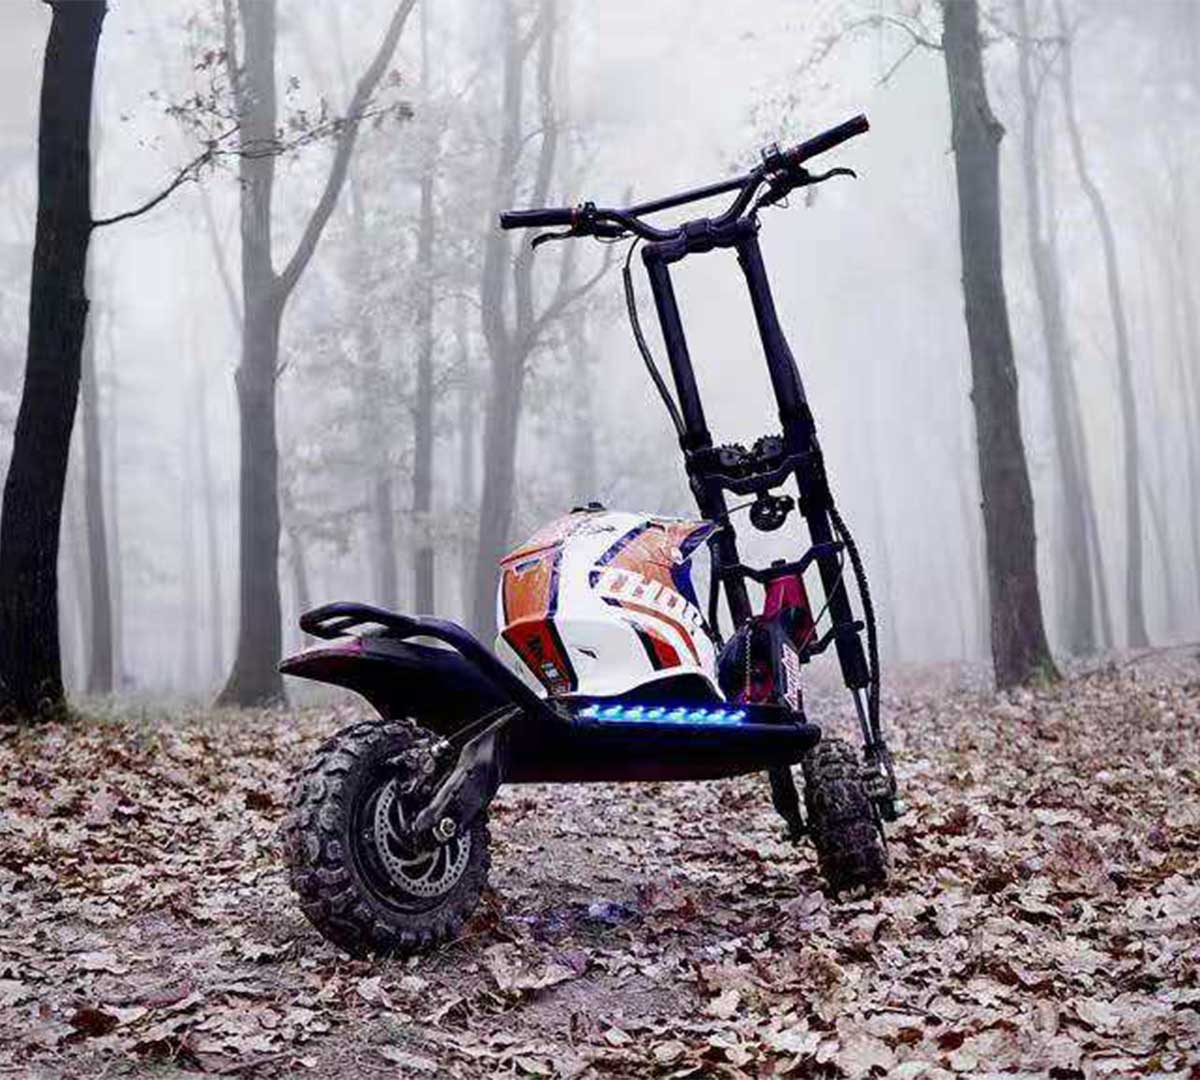 A high-performance electric scooter with chunky off-road tires is parked amidst a forest covered in fallen leaves, suggesting its use in electric scooter racing, a potential new adventurous sport.